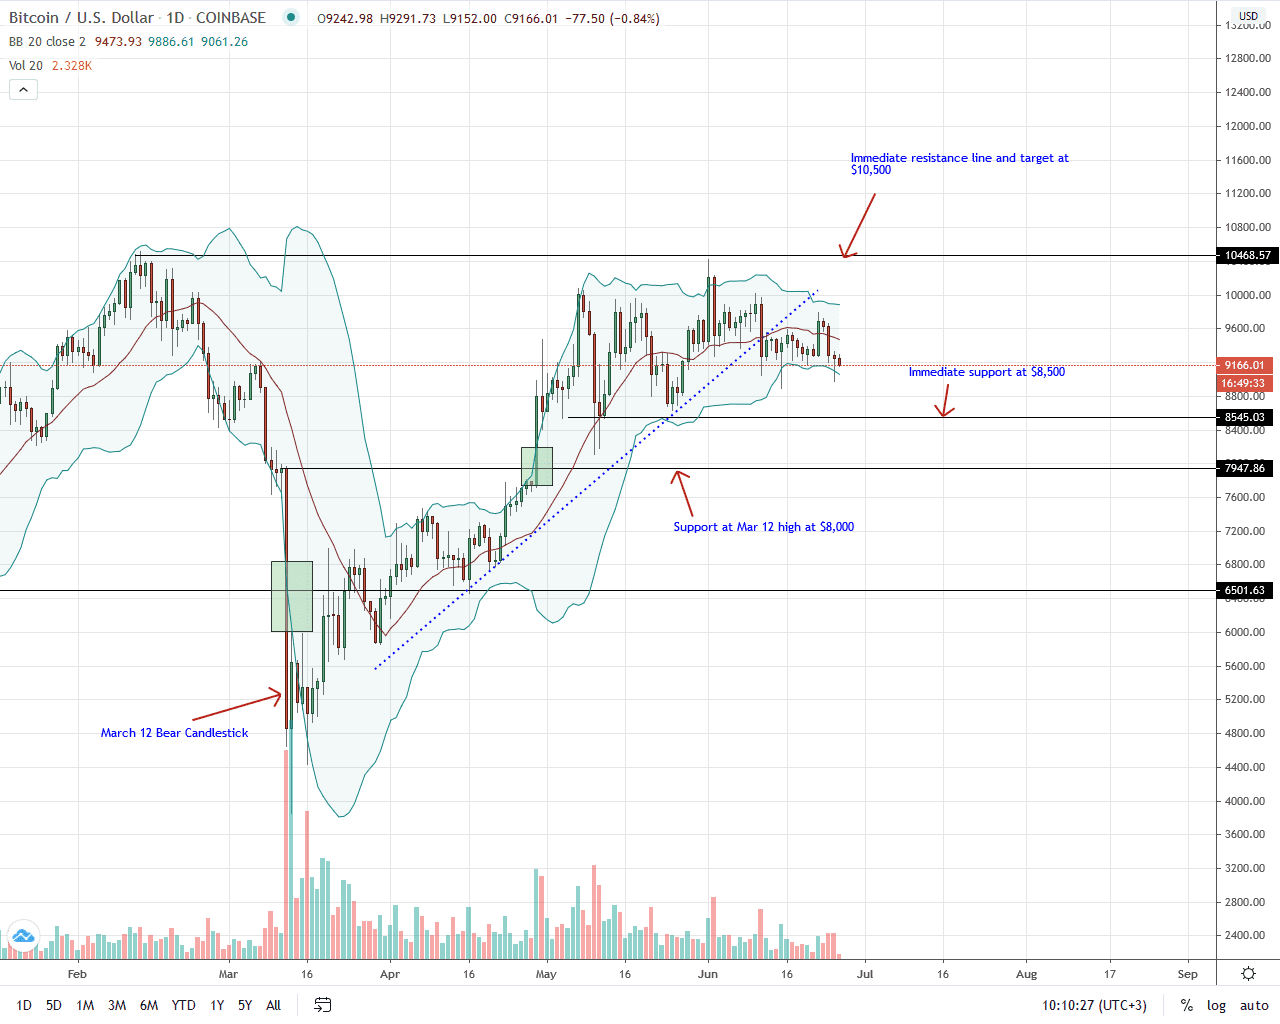 Bitcoin Daily Chart for June 26, 2020